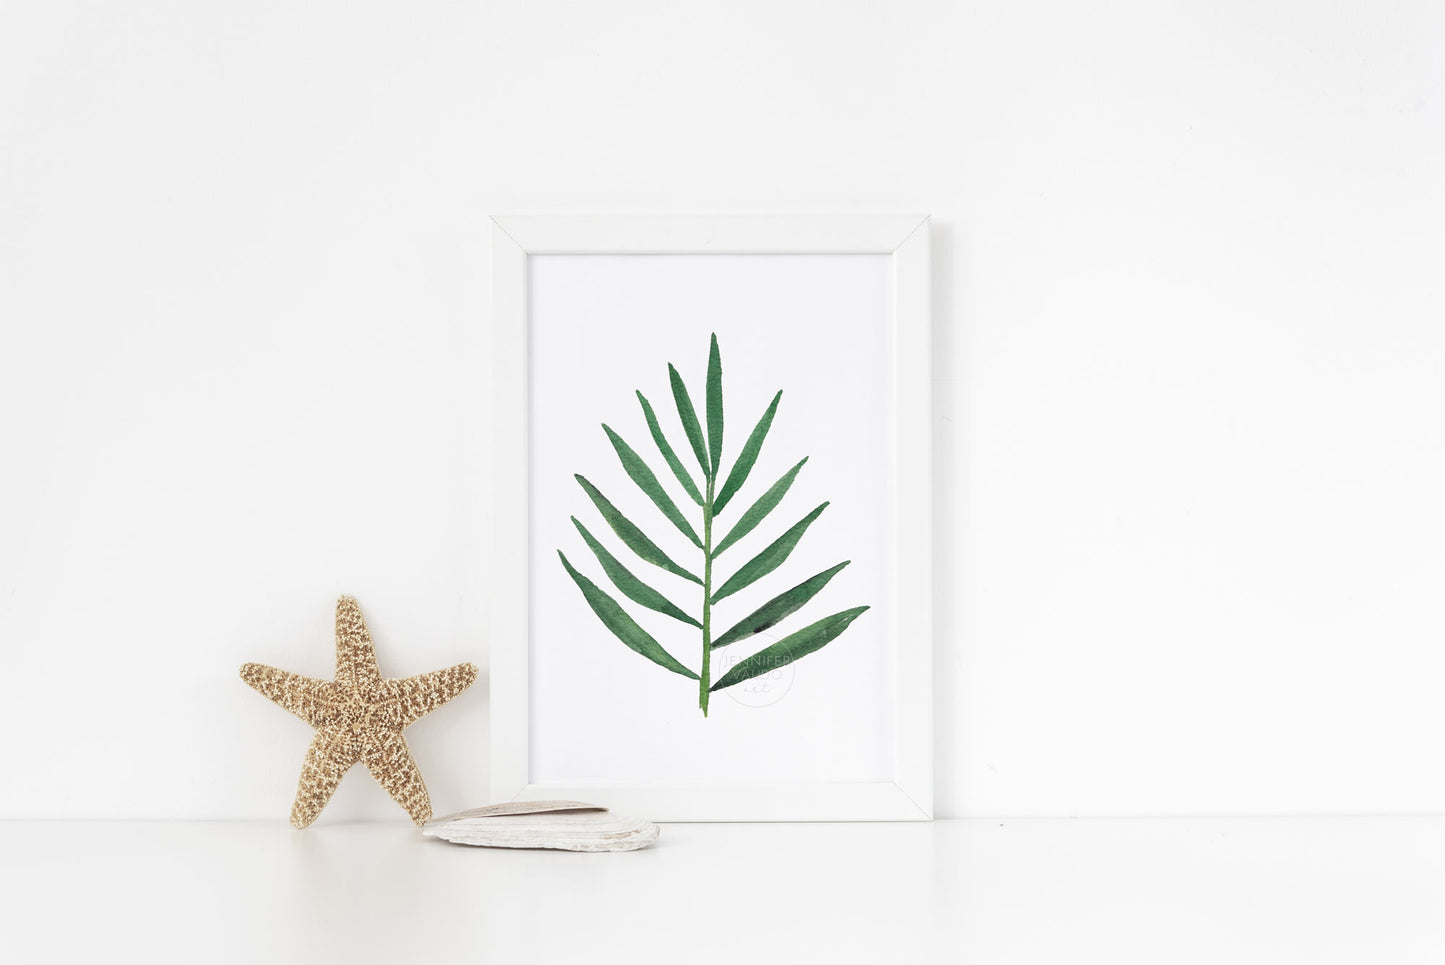 Palm Leaf Wall Art, Tropical Wall Decor, Palm Frond Watercolor Art, Plant Lover Gift Green Wall Art Home Interior Decor Hand-painted print